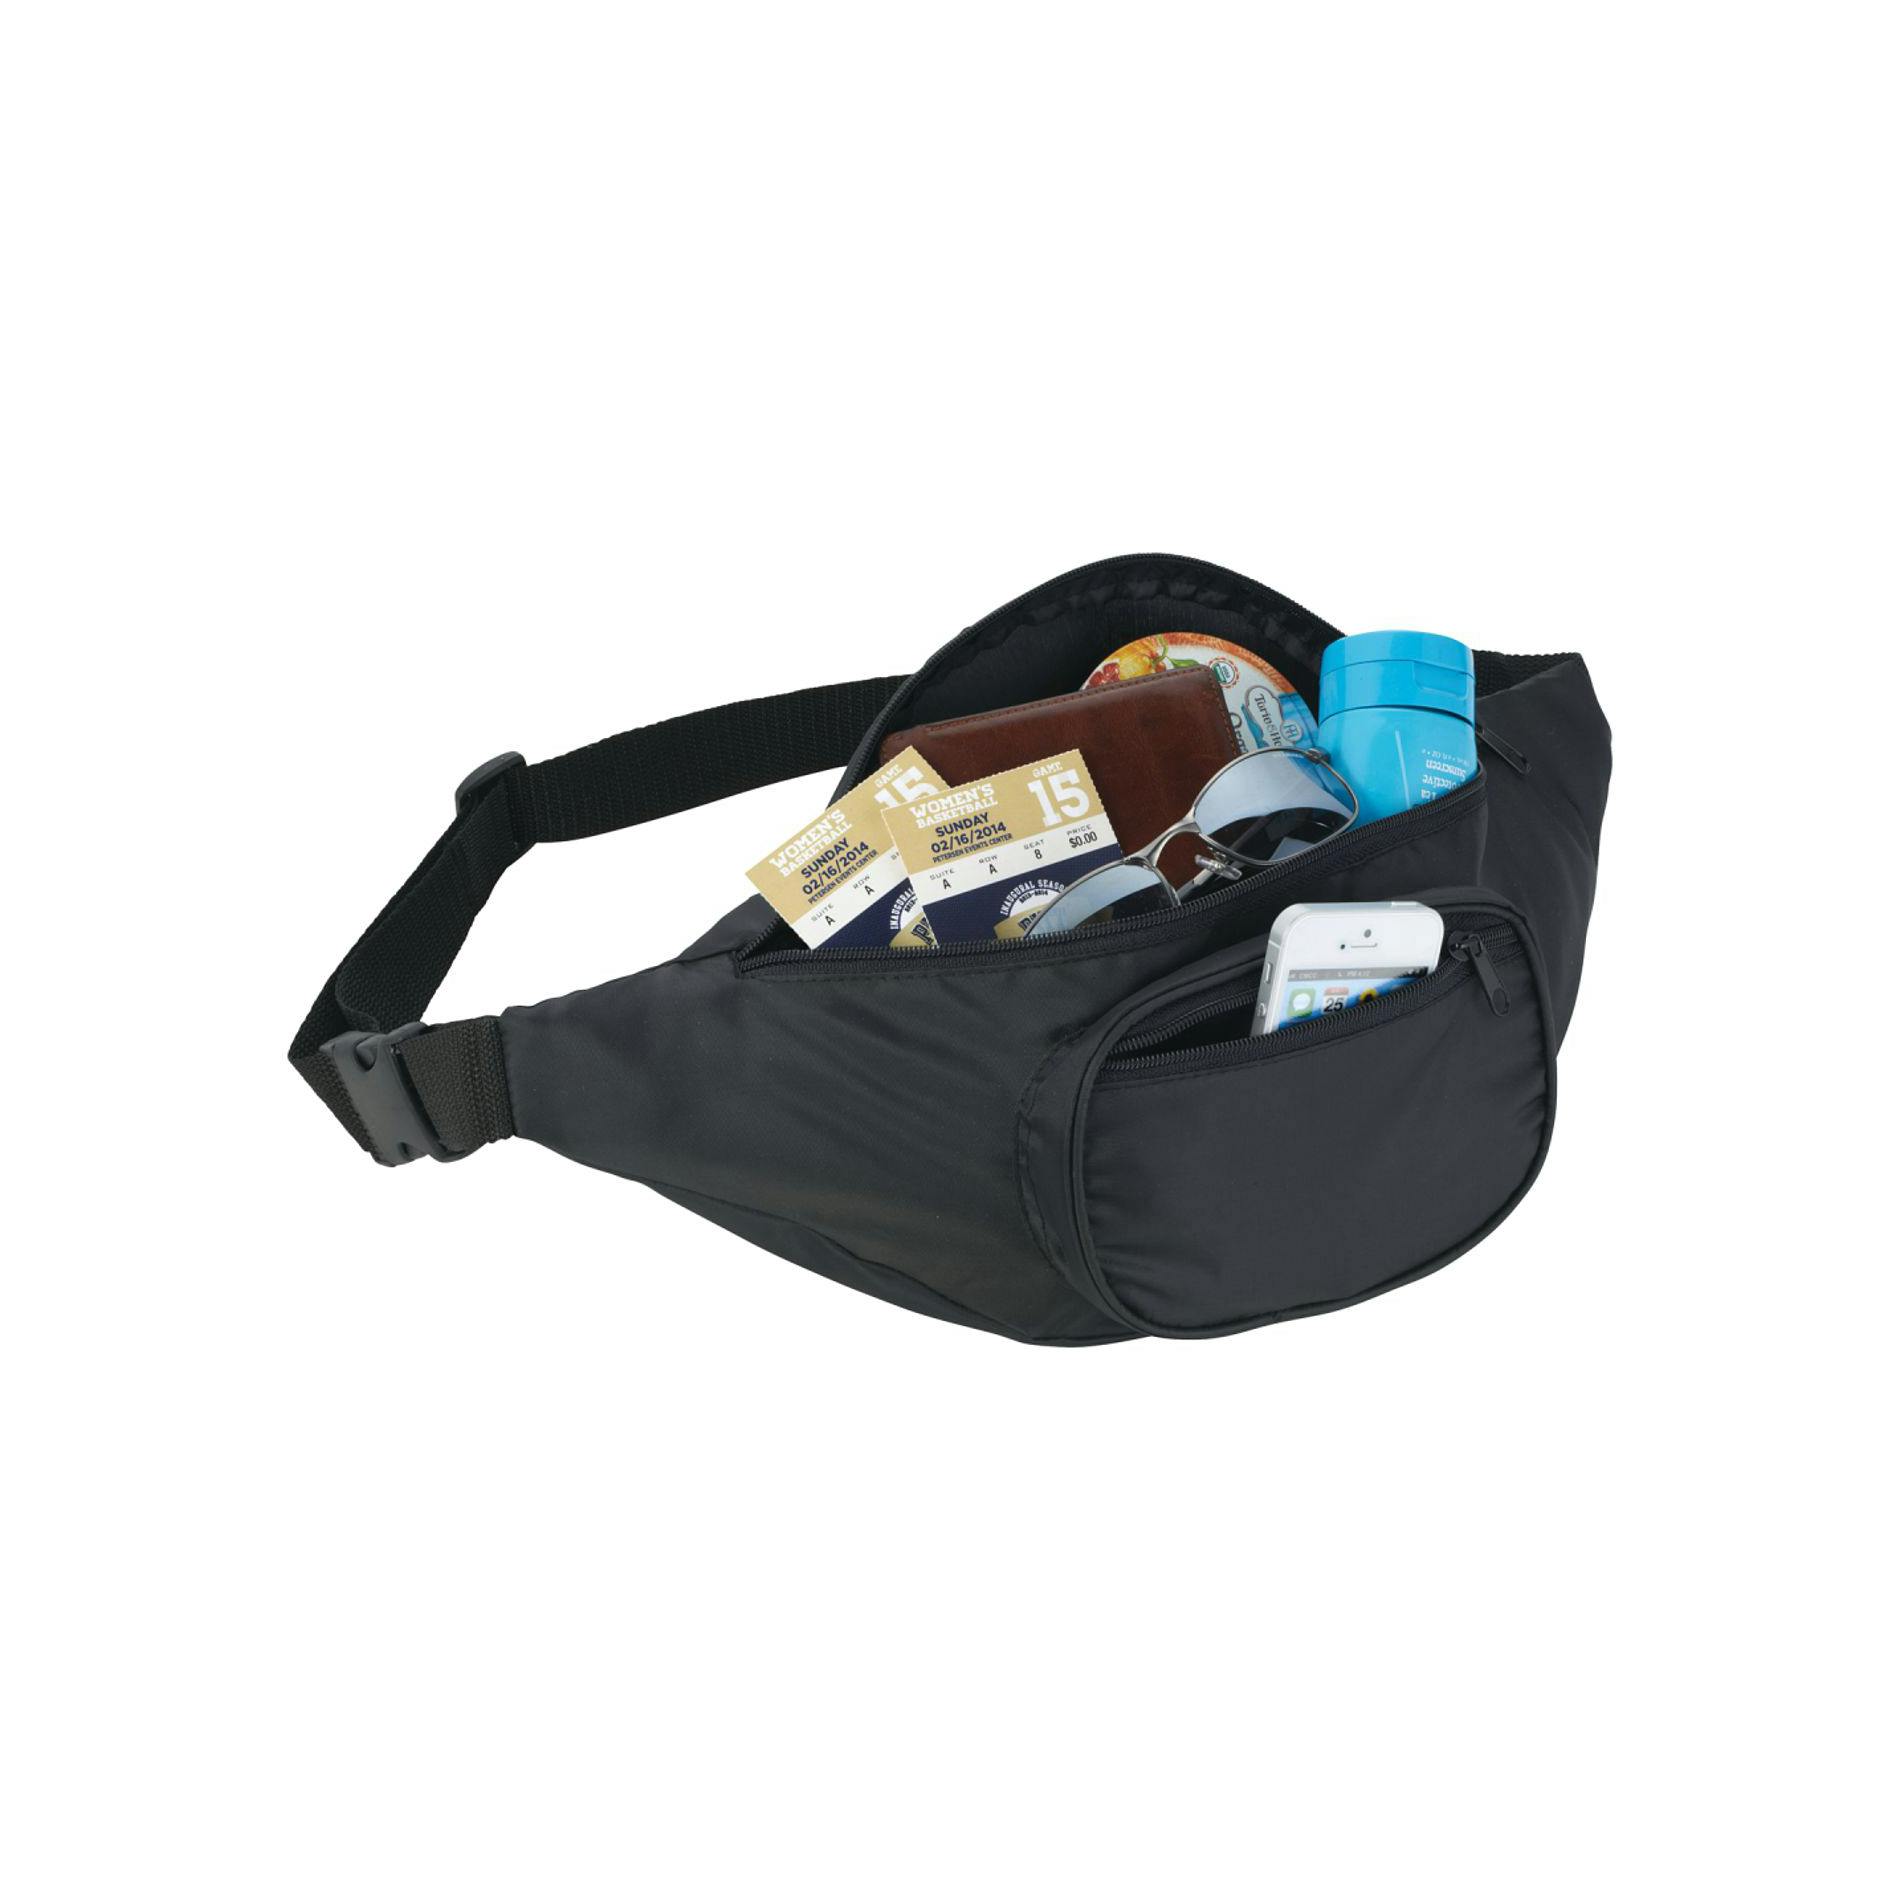 Hipster Deluxe Fanny Pack - additional Image 2